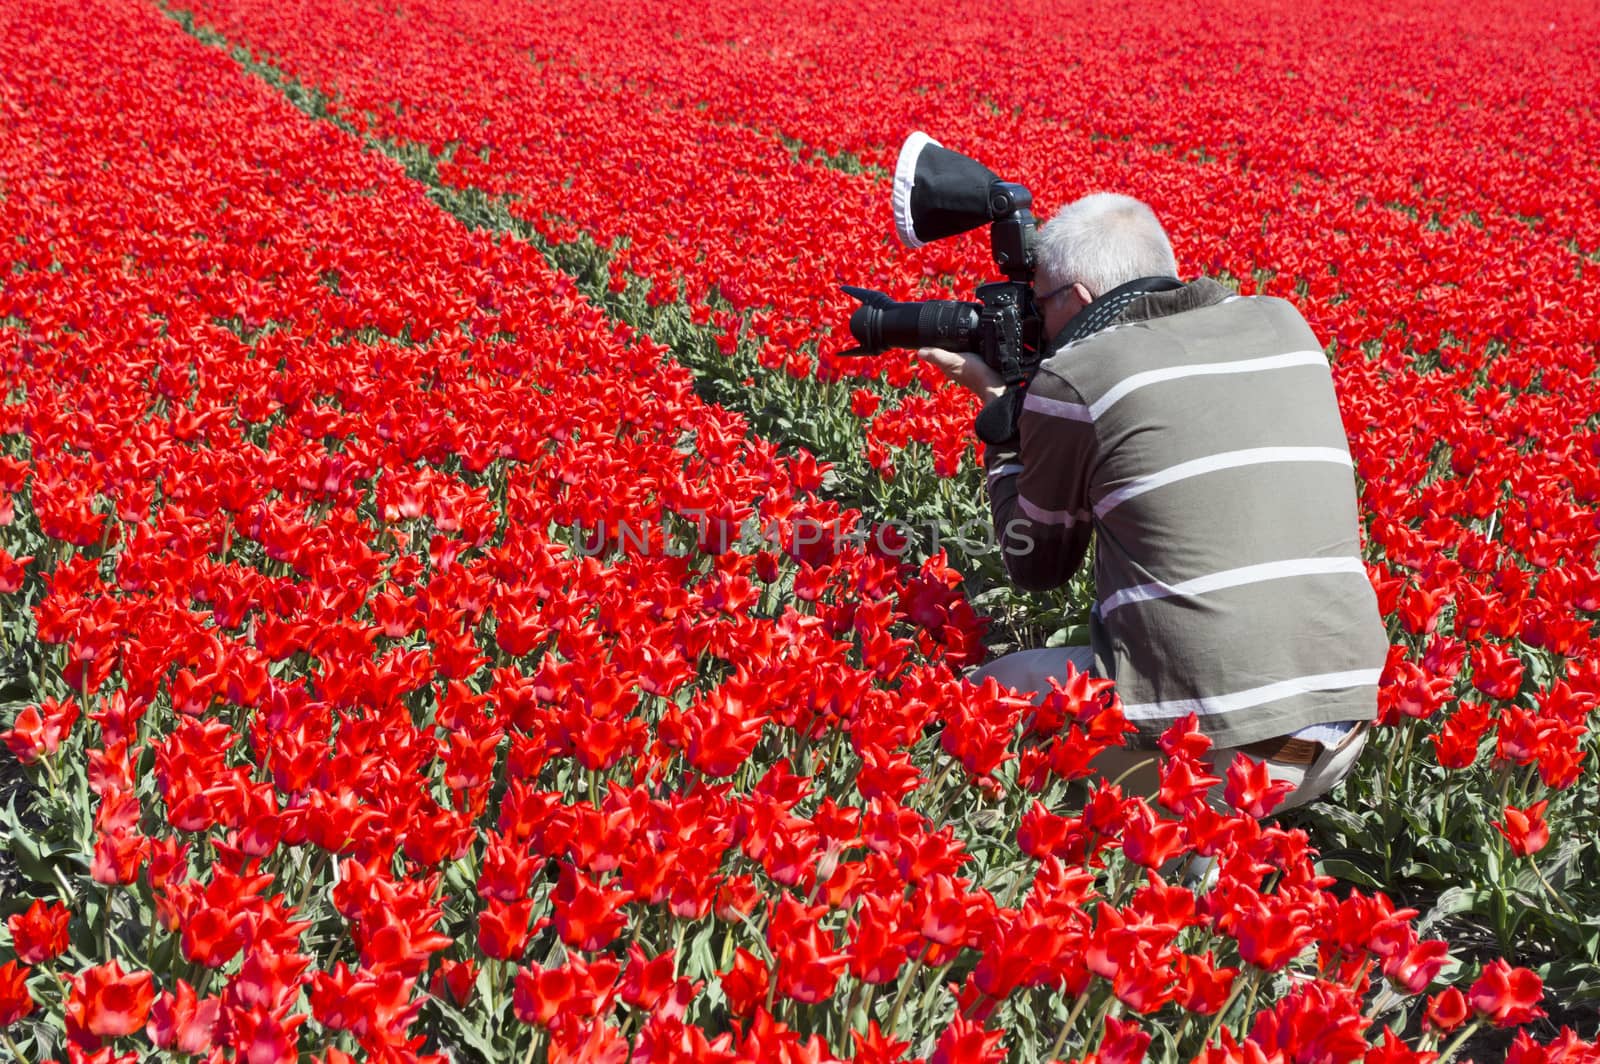 man making photos in red tulip field in holland